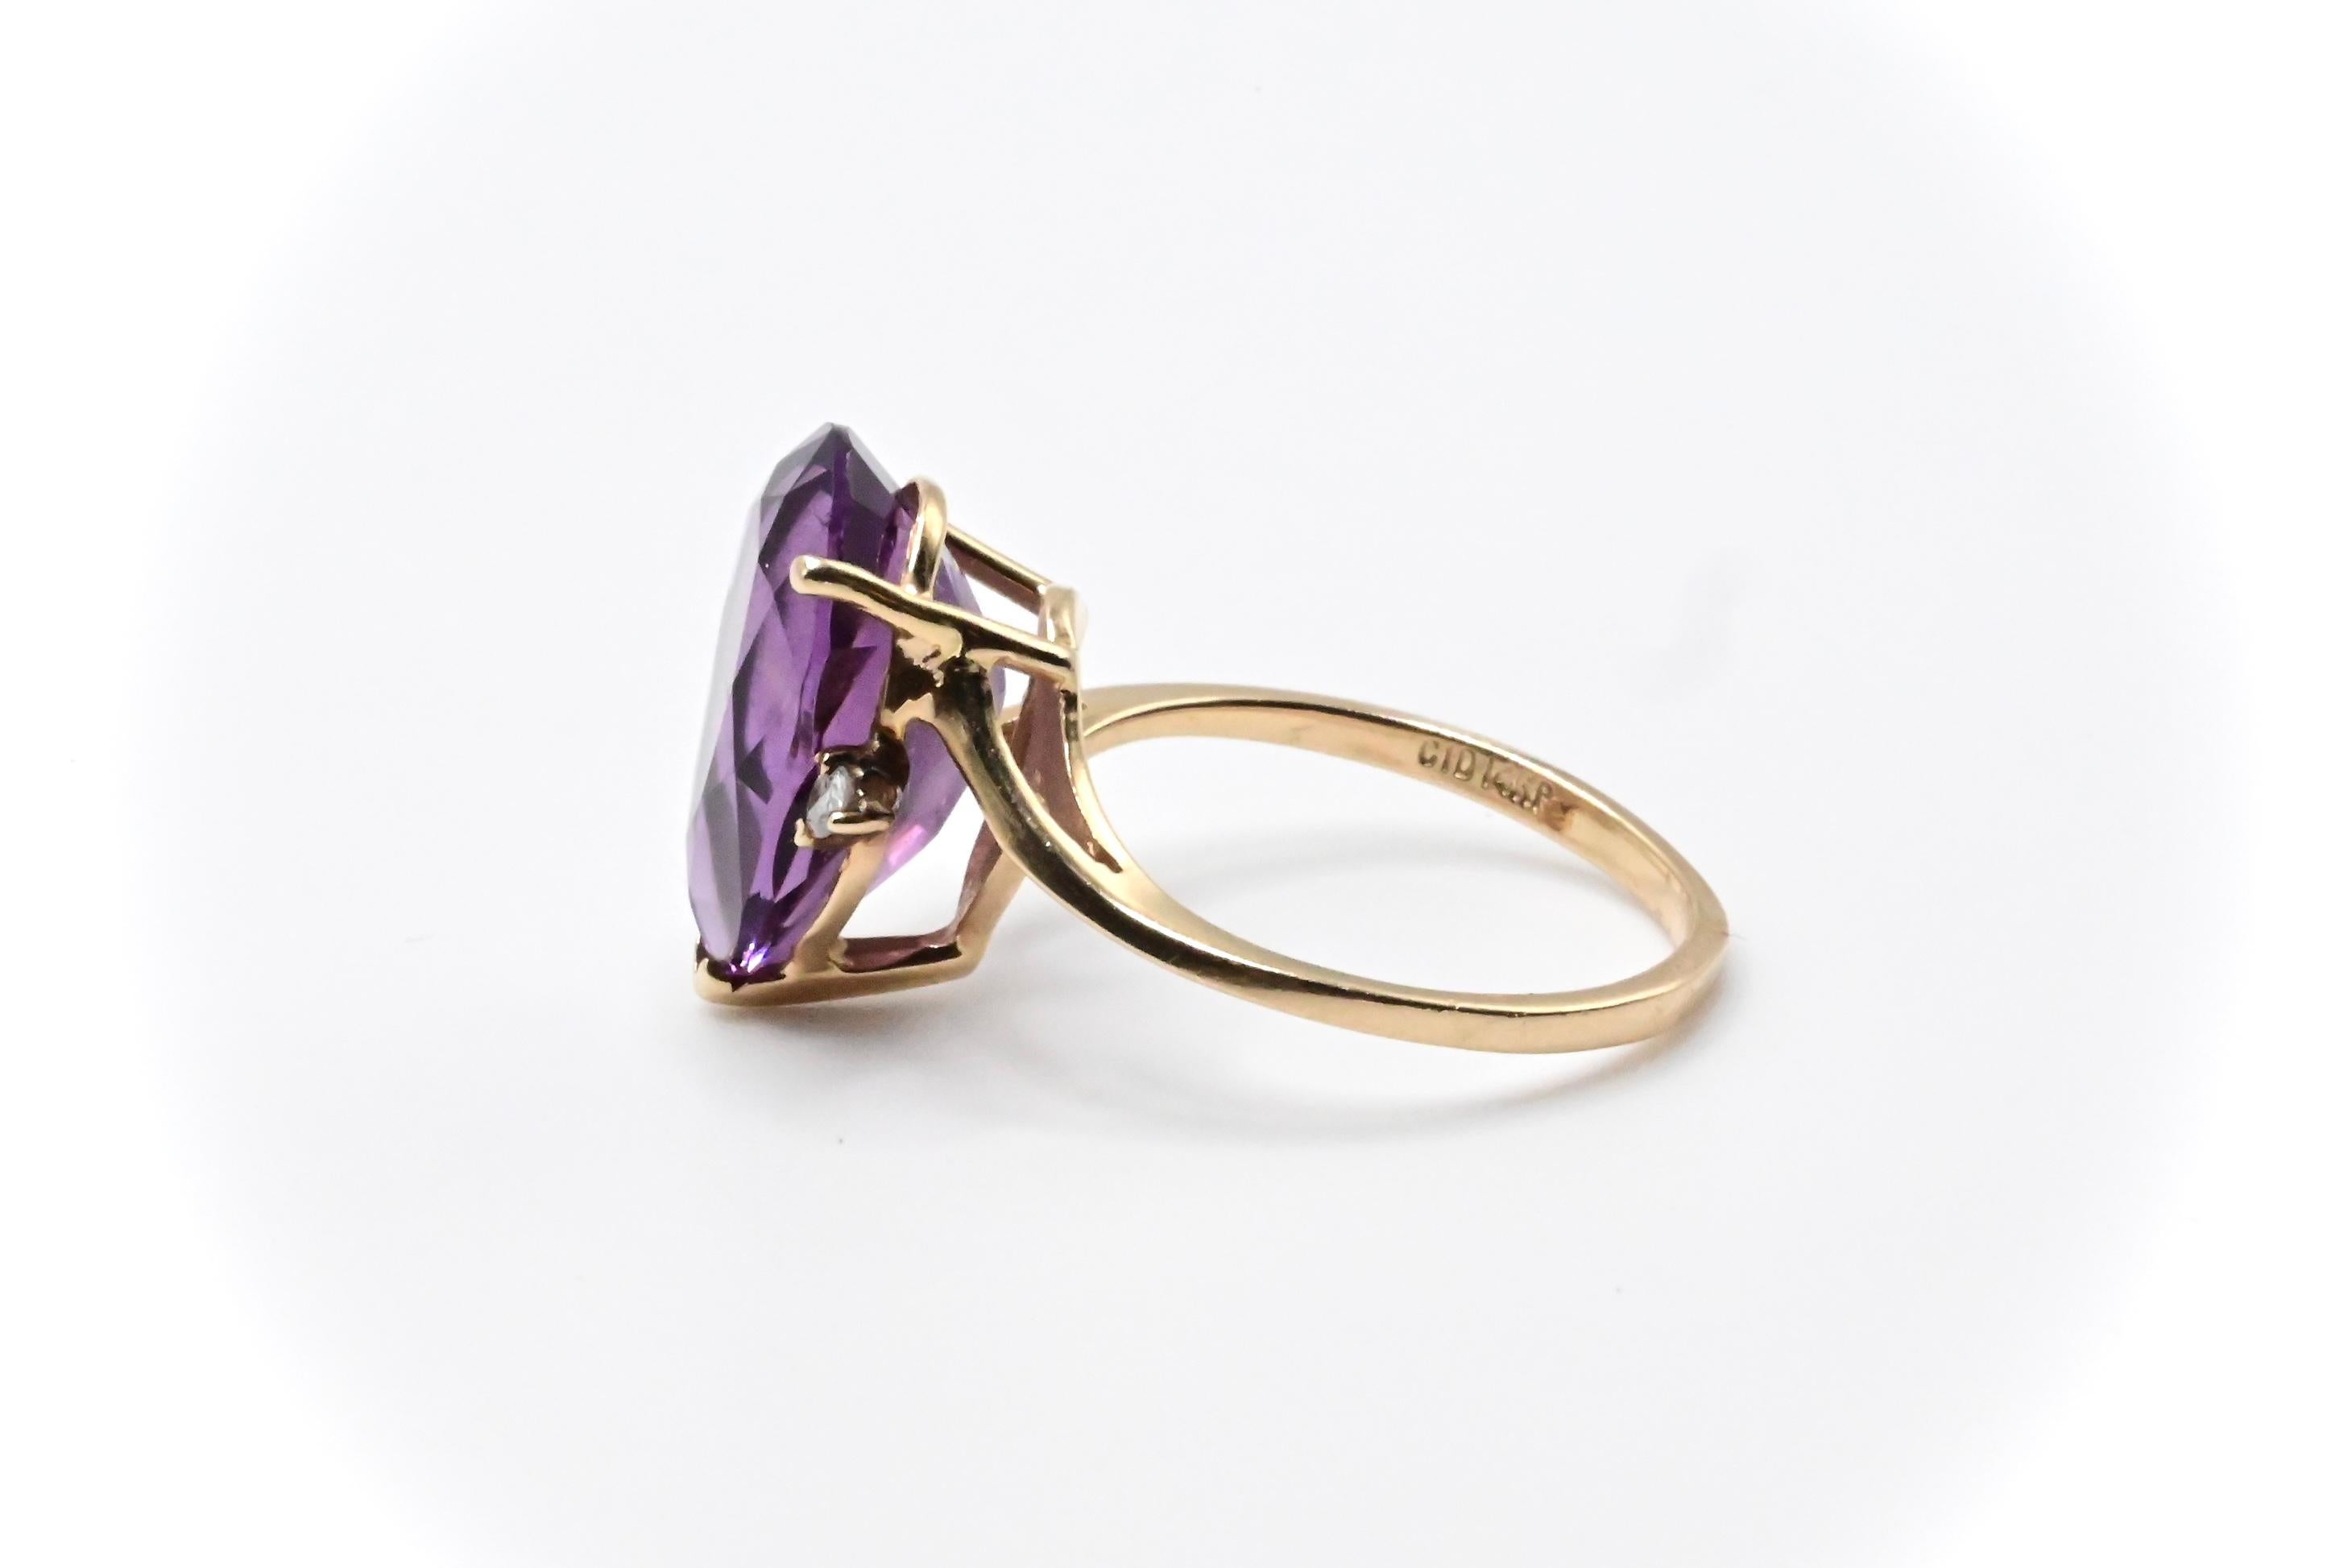 This is a lovely 14k gold ring with a pear cut purple amethyst in the center, and a gorgeous diamond accent on each side. The ring is a size 6 1/4, and weighs about 3 grams. It’s in great condition, and if you have any questions or concerns about